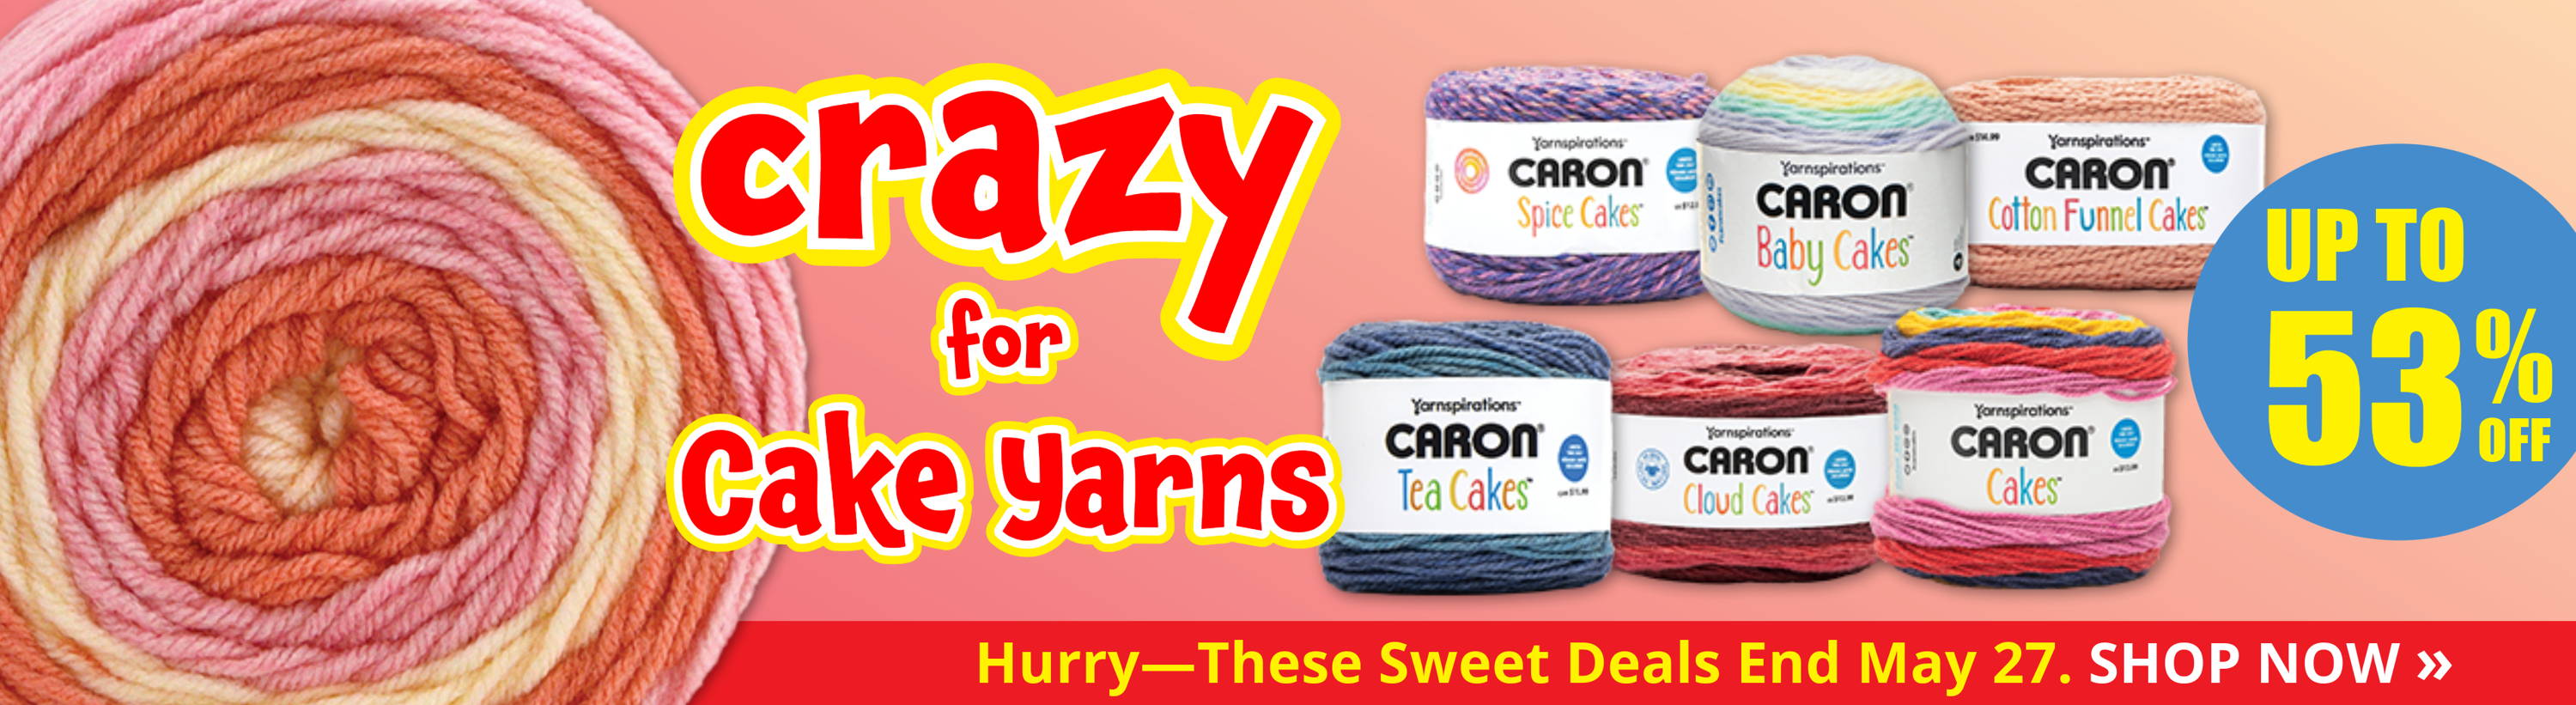 Crazy for Cake Yarns Sale — Up to 53% off Cake Yarns until May 27. Image: Assorted Caron Cake Yarns.